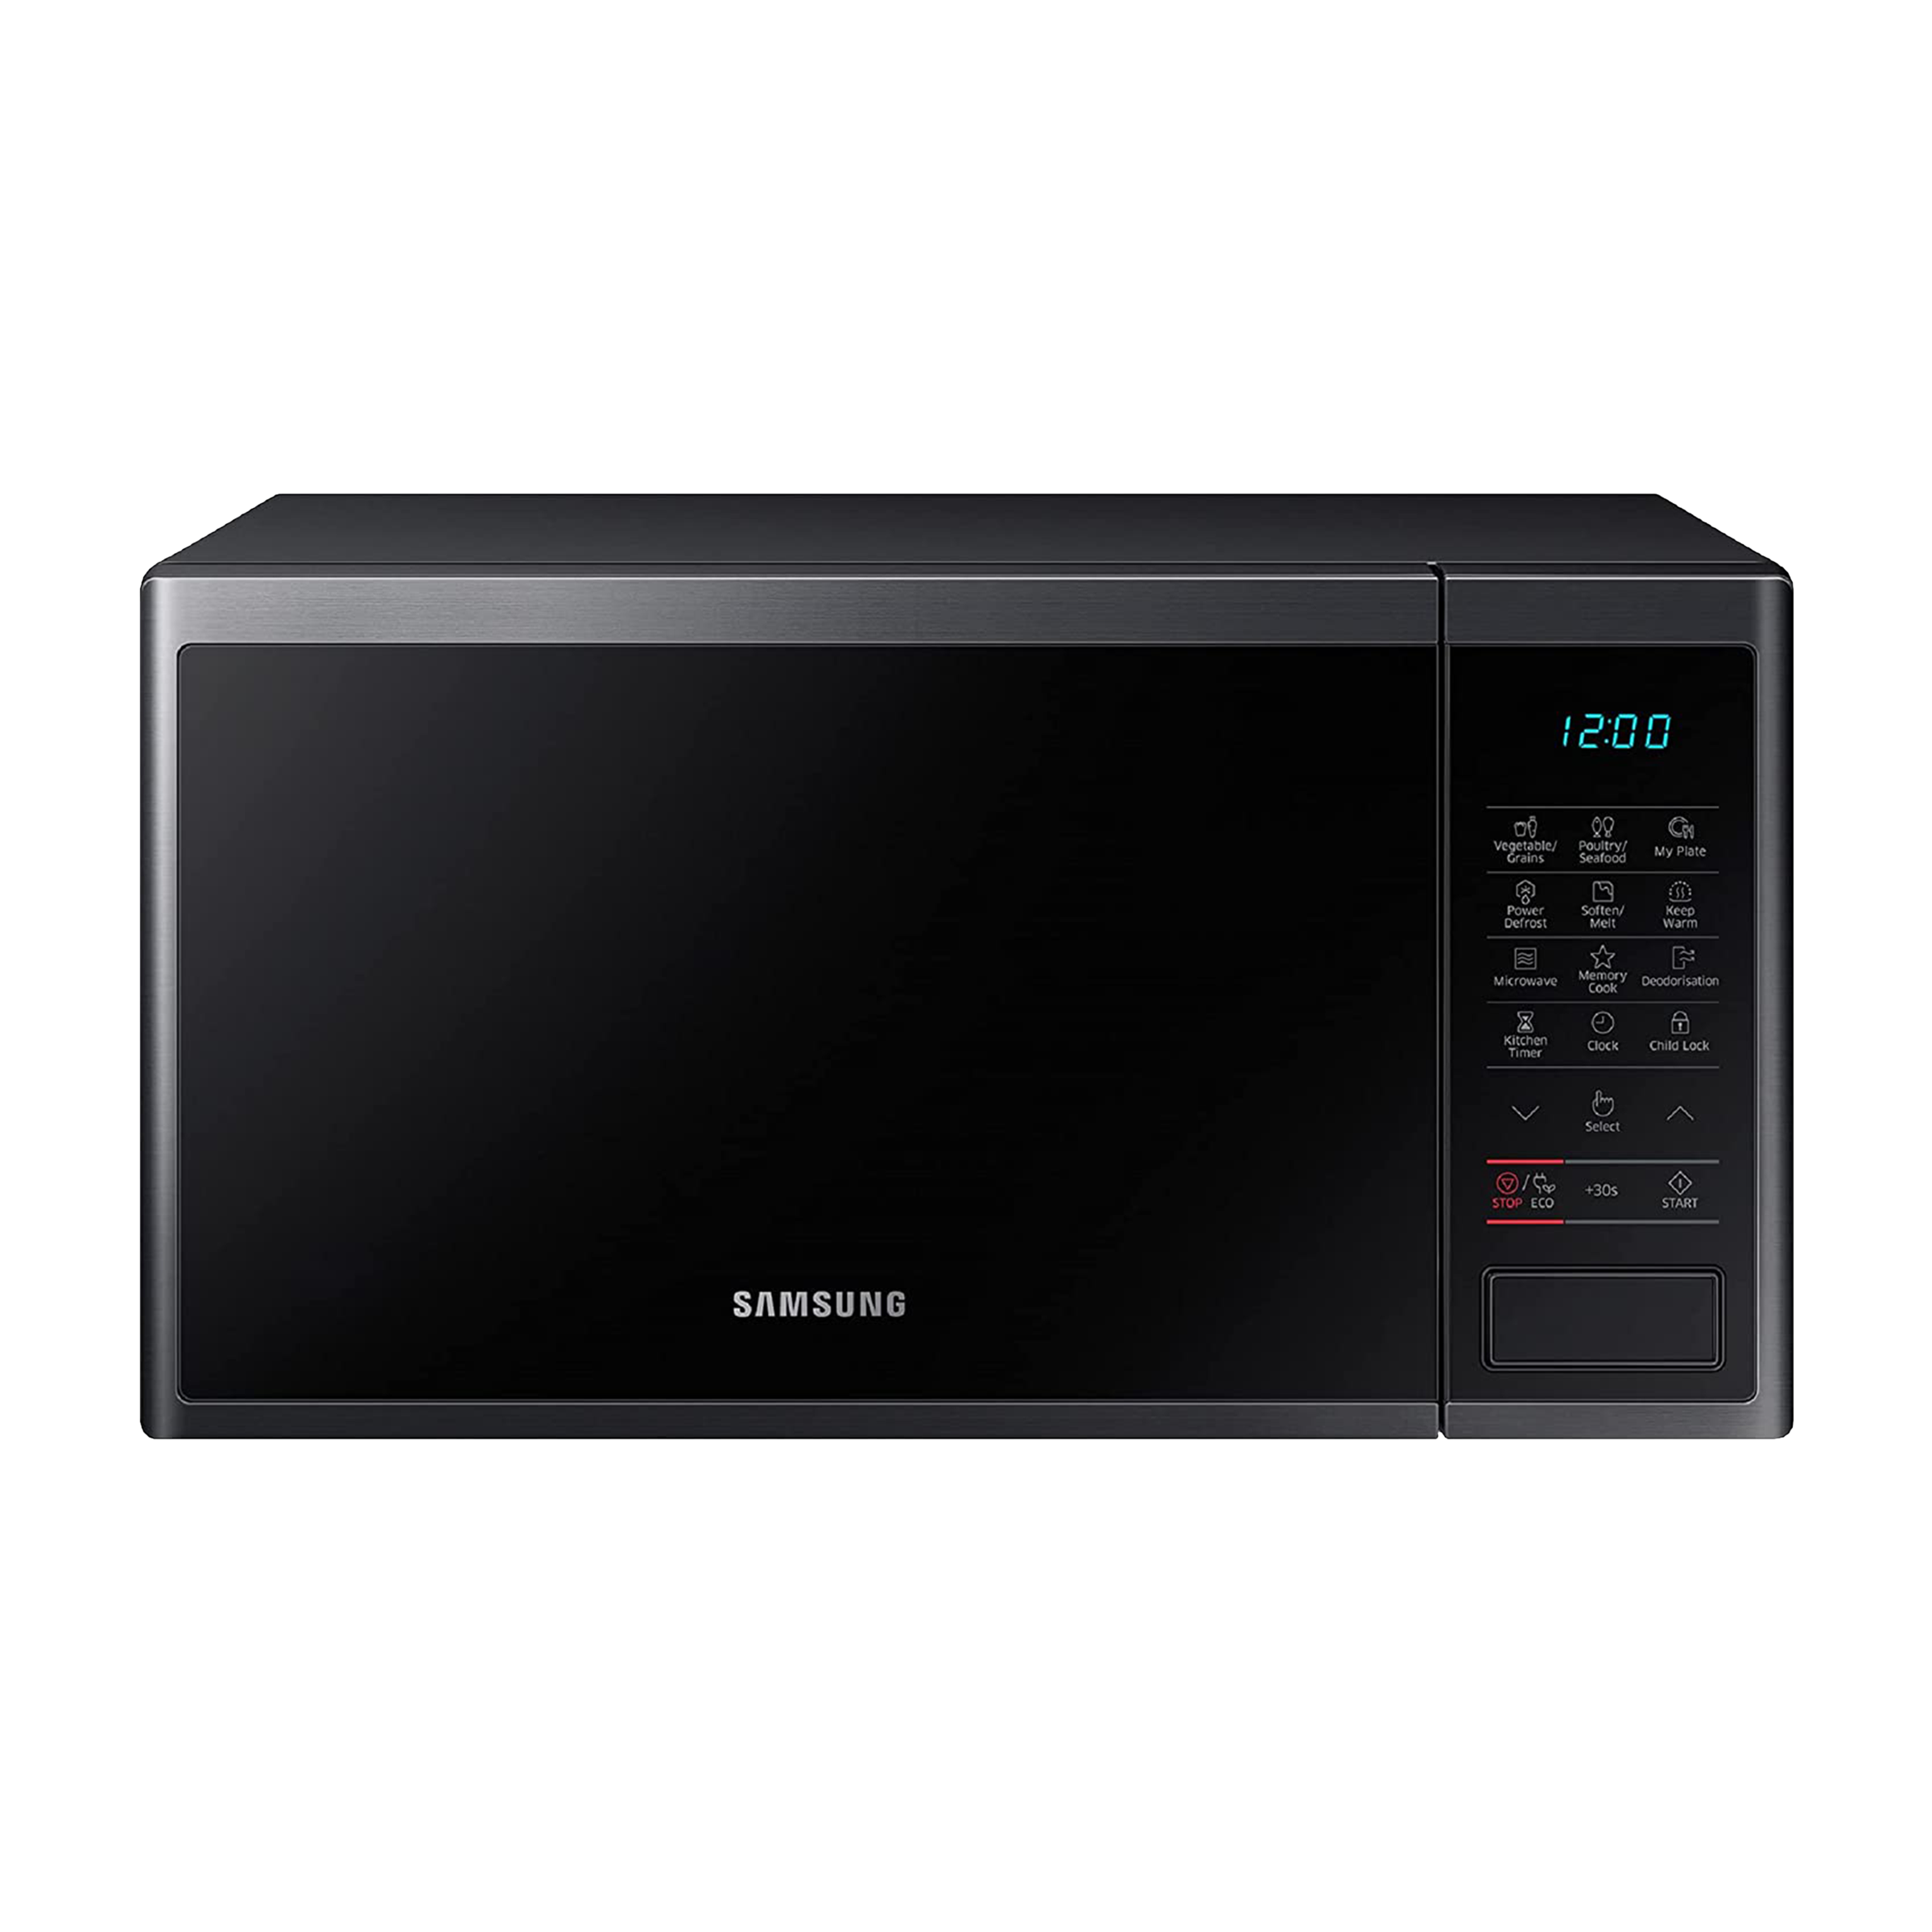 SAMSUNG 23 Litres Solo Microwave Oven (Pre-Heating and Keep Warm Function, MS23J5133AG/TL, Black)_1